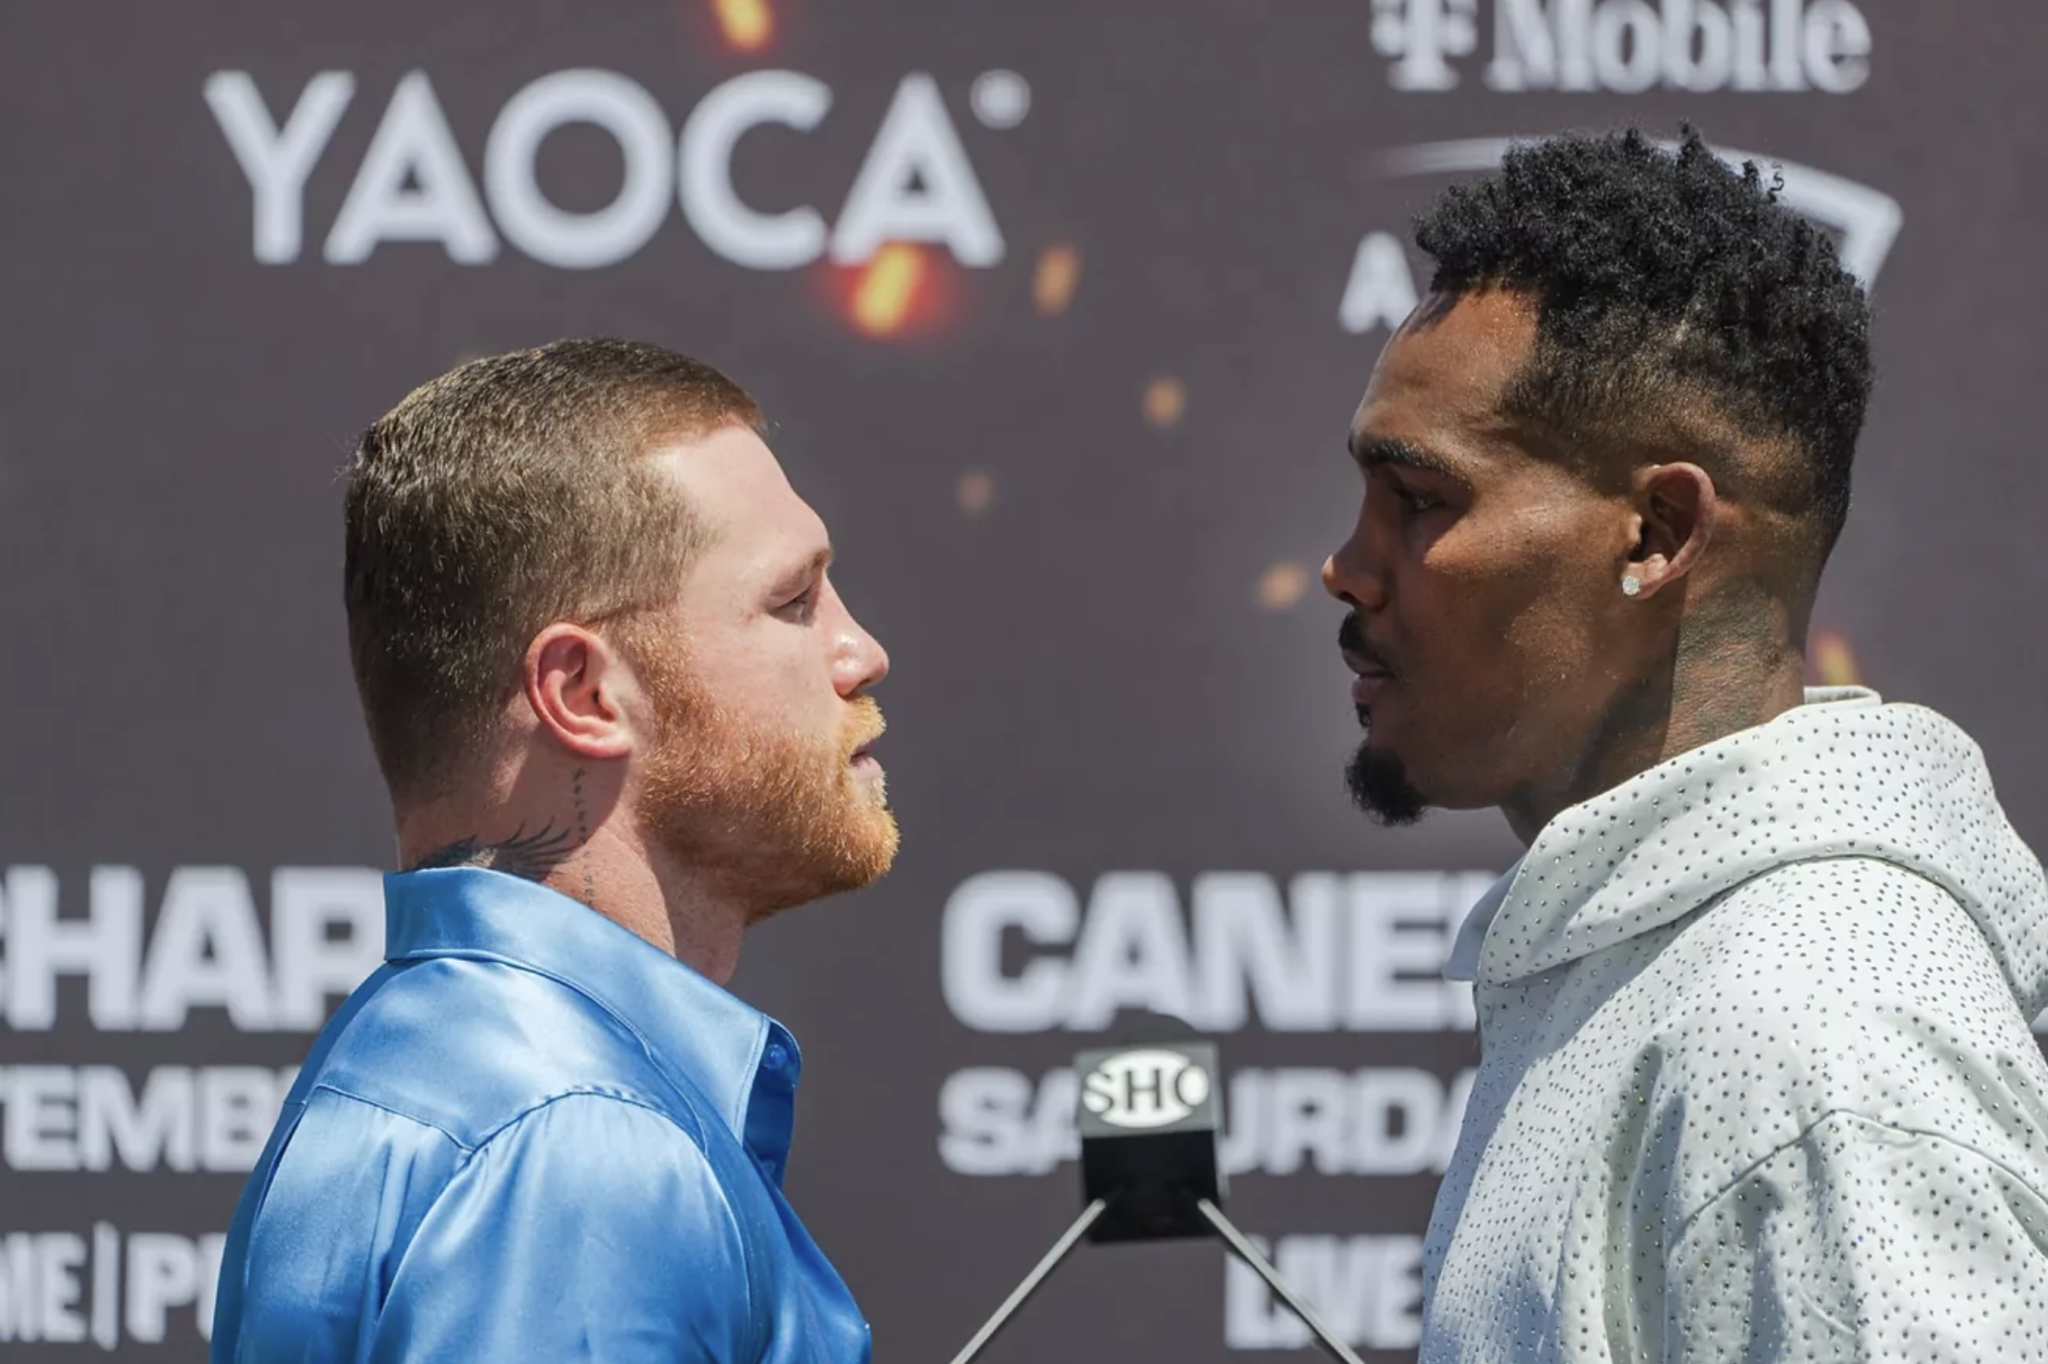 Canelo Alvarez vs Jermell Charlo: Date, time, where to watch, PPV and more